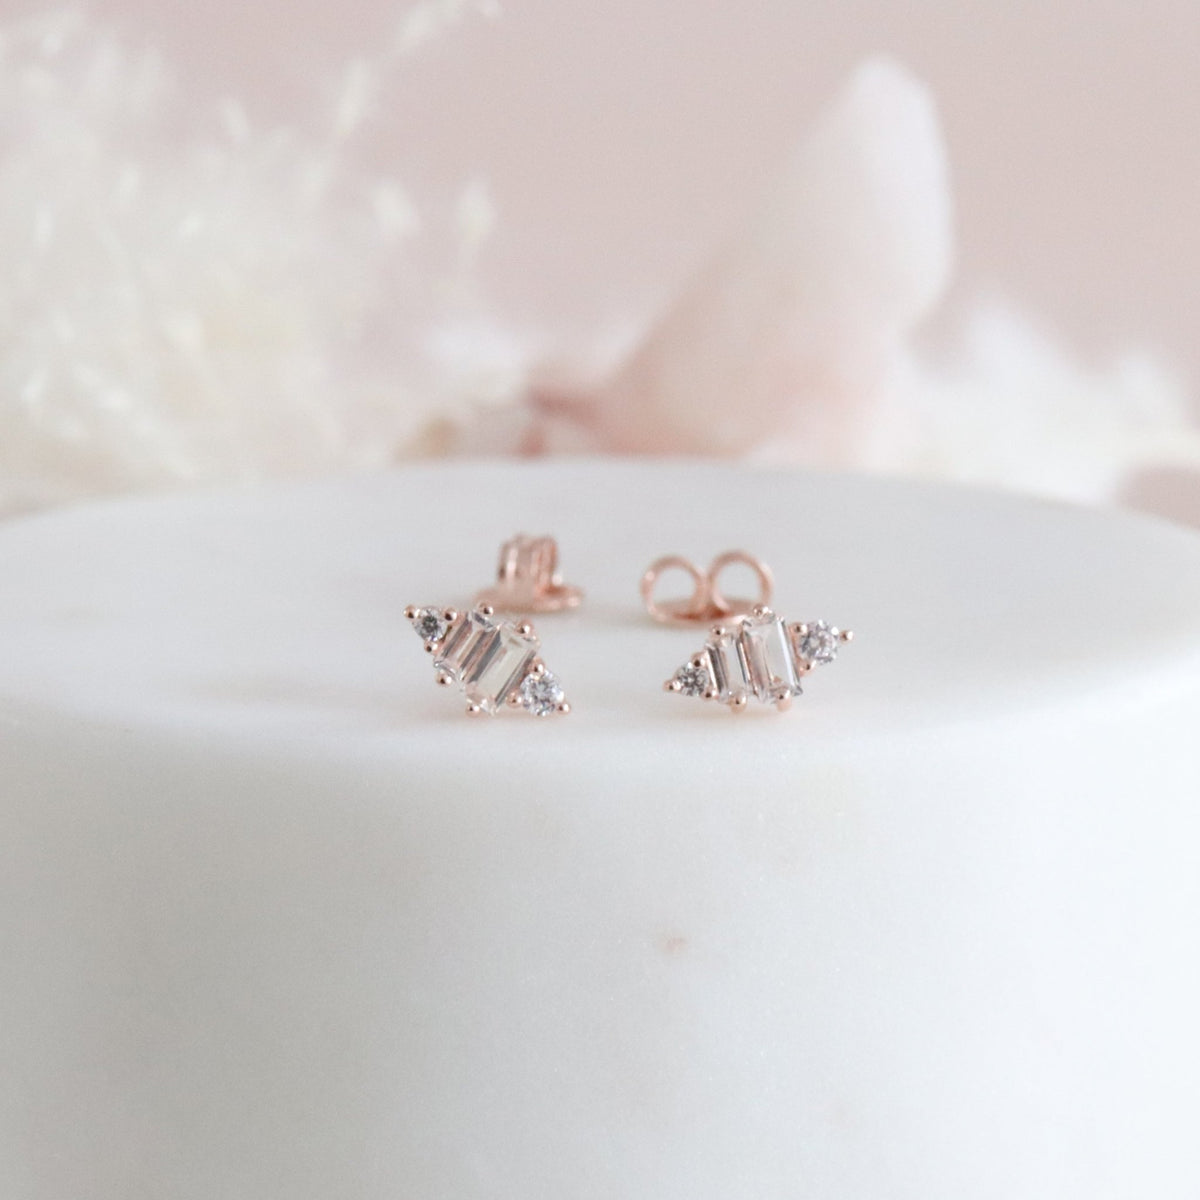 TINY LOYAL PRISM STUDS - WHITE TOPAZ, CUBIC ZIRCONIA, &amp; ROSE GOLD - SO PRETTY CARA COTTER